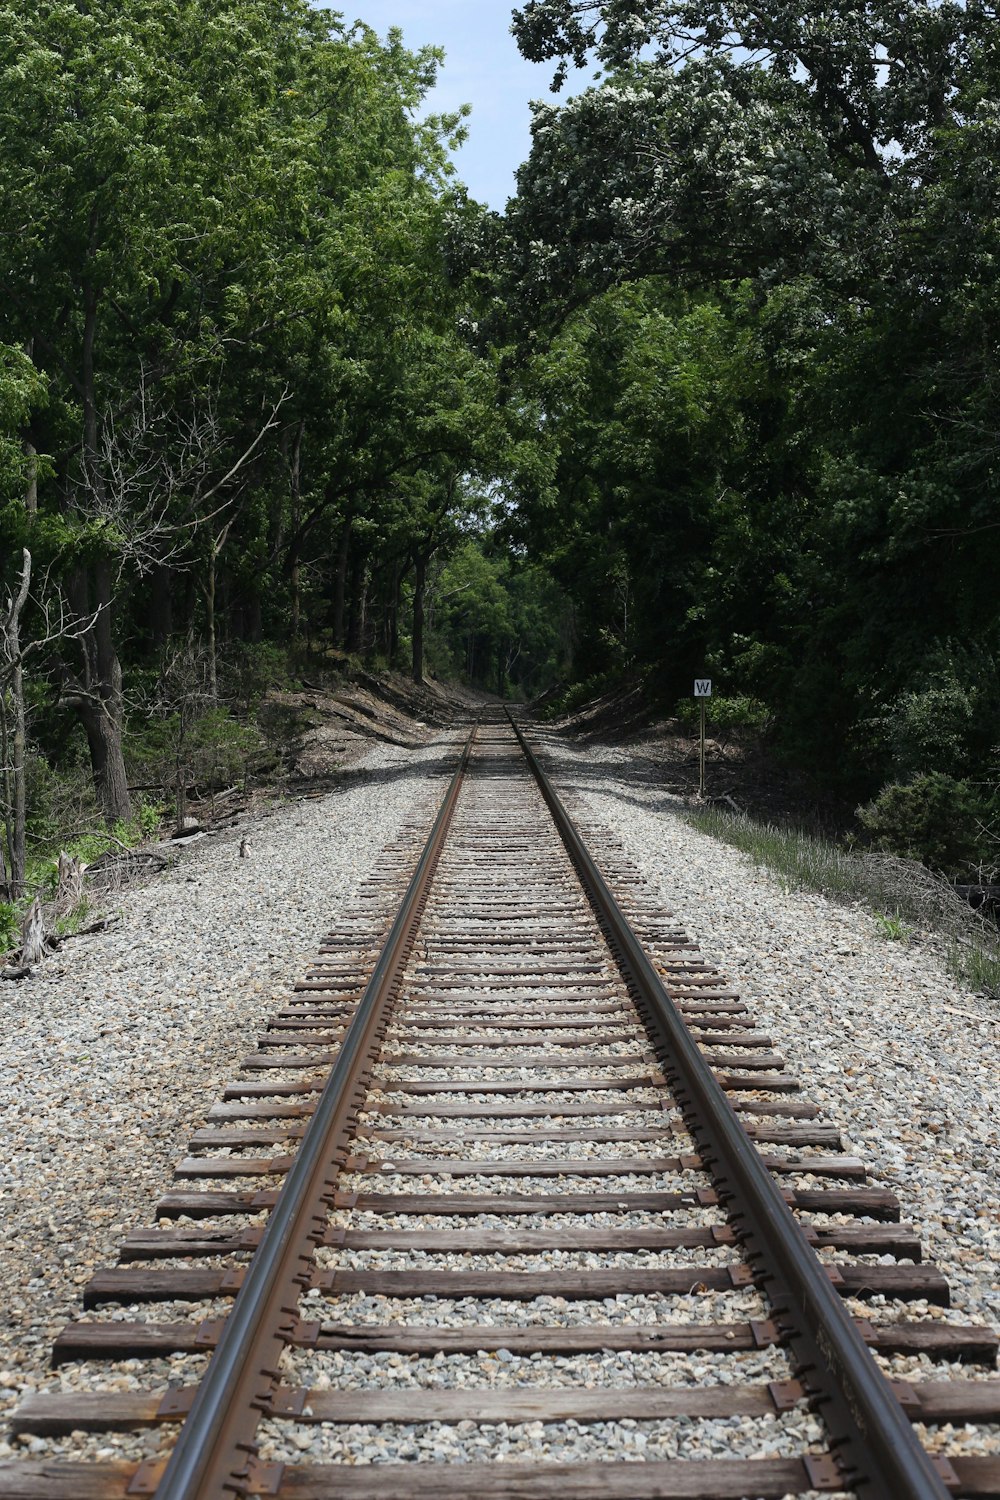 a train track running through a wooded area